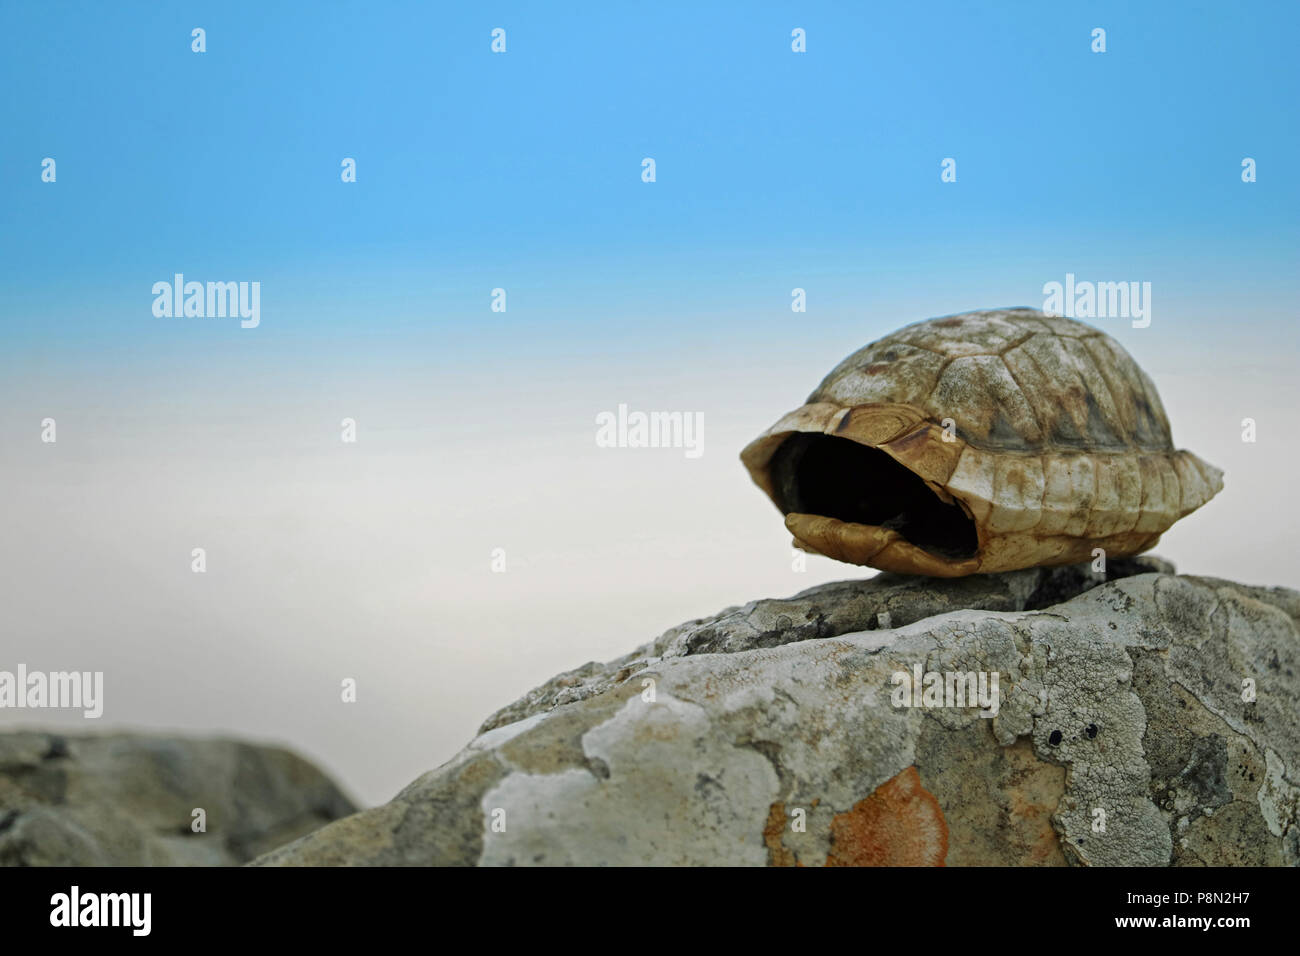 Empty little turtle shell of Testudo hermanni on stone with blue cloudy sky in background Stock Photo